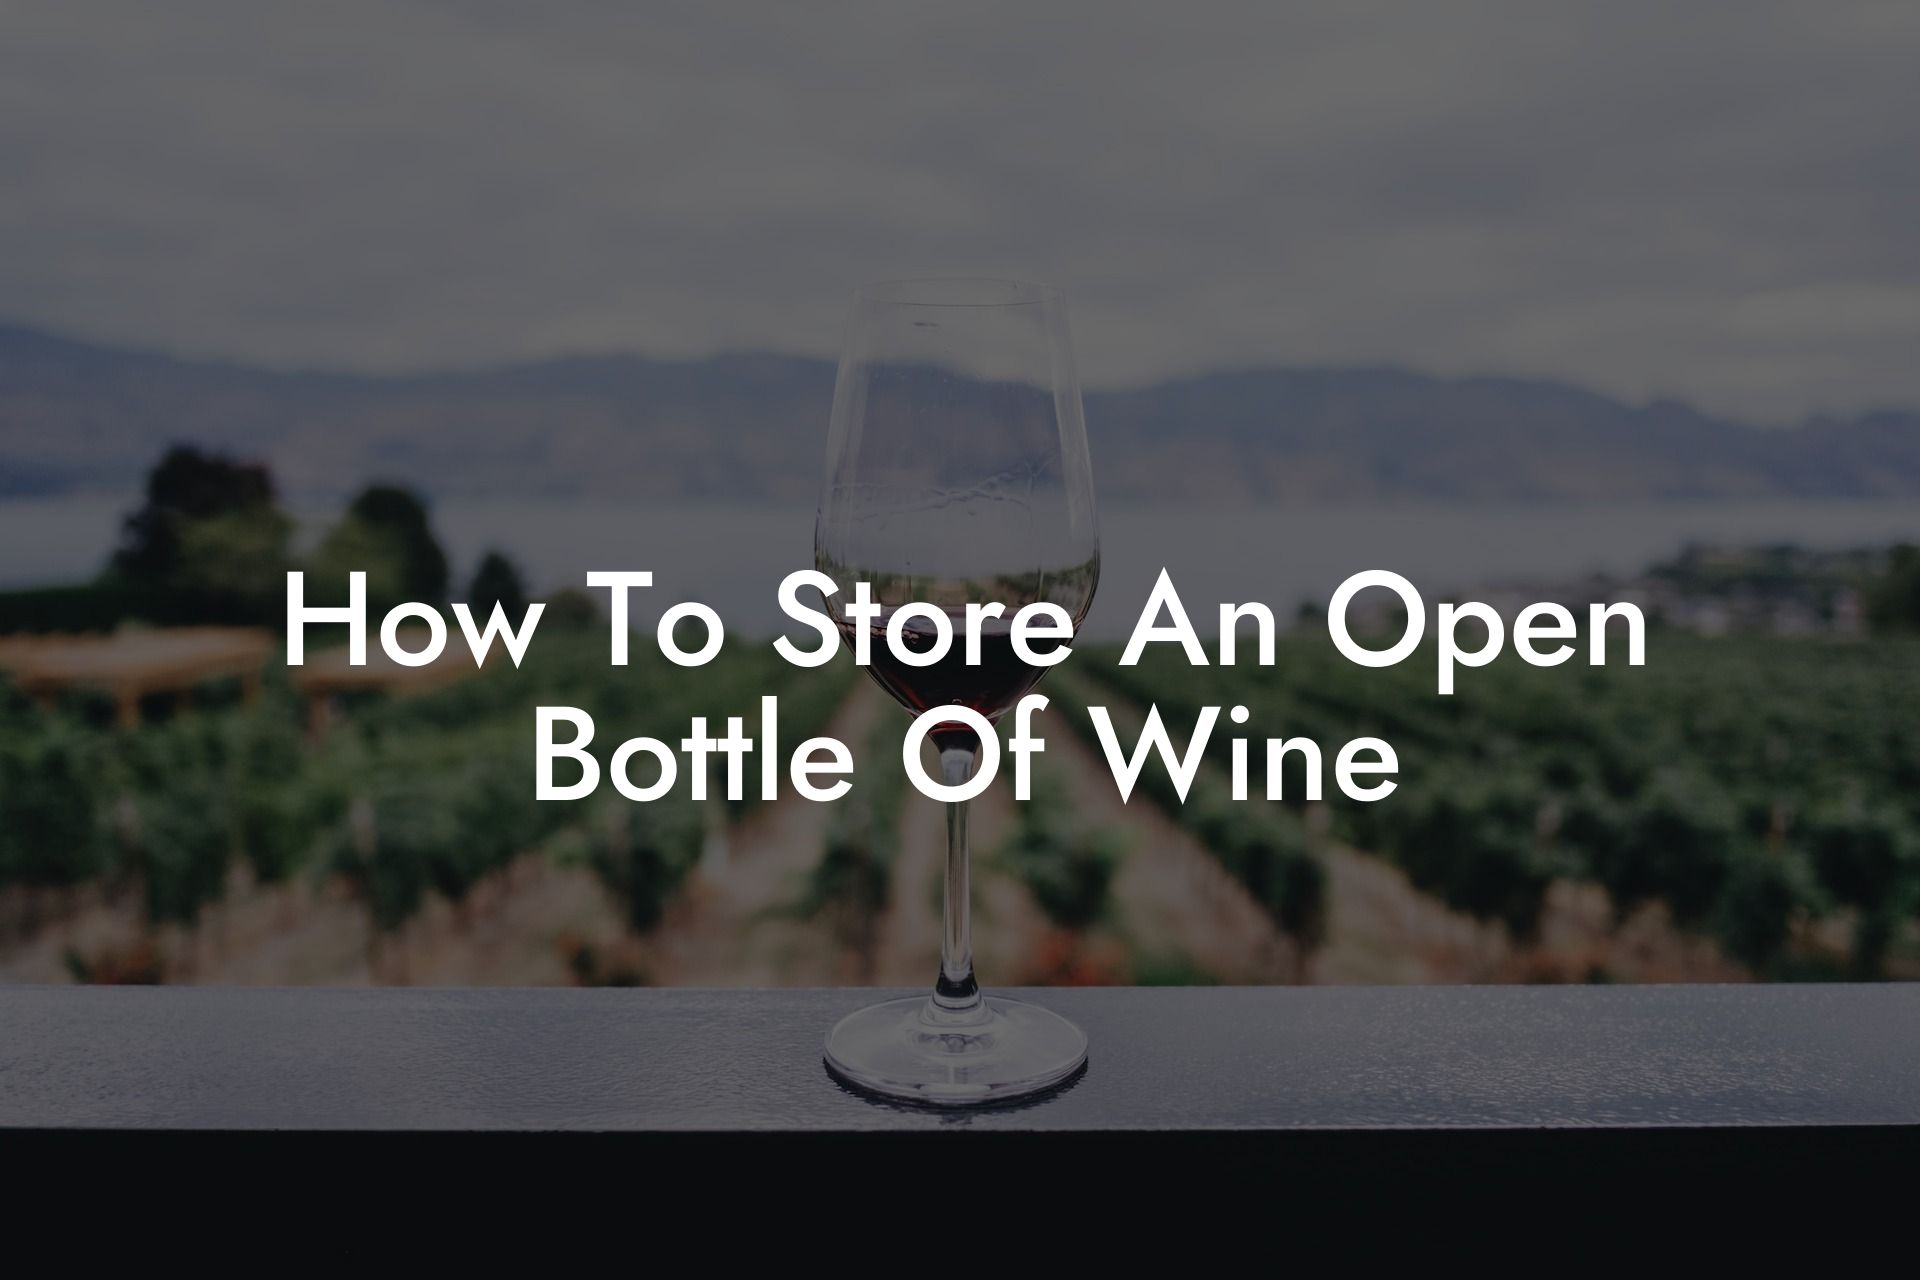 How To Store An Open Bottle Of Wine